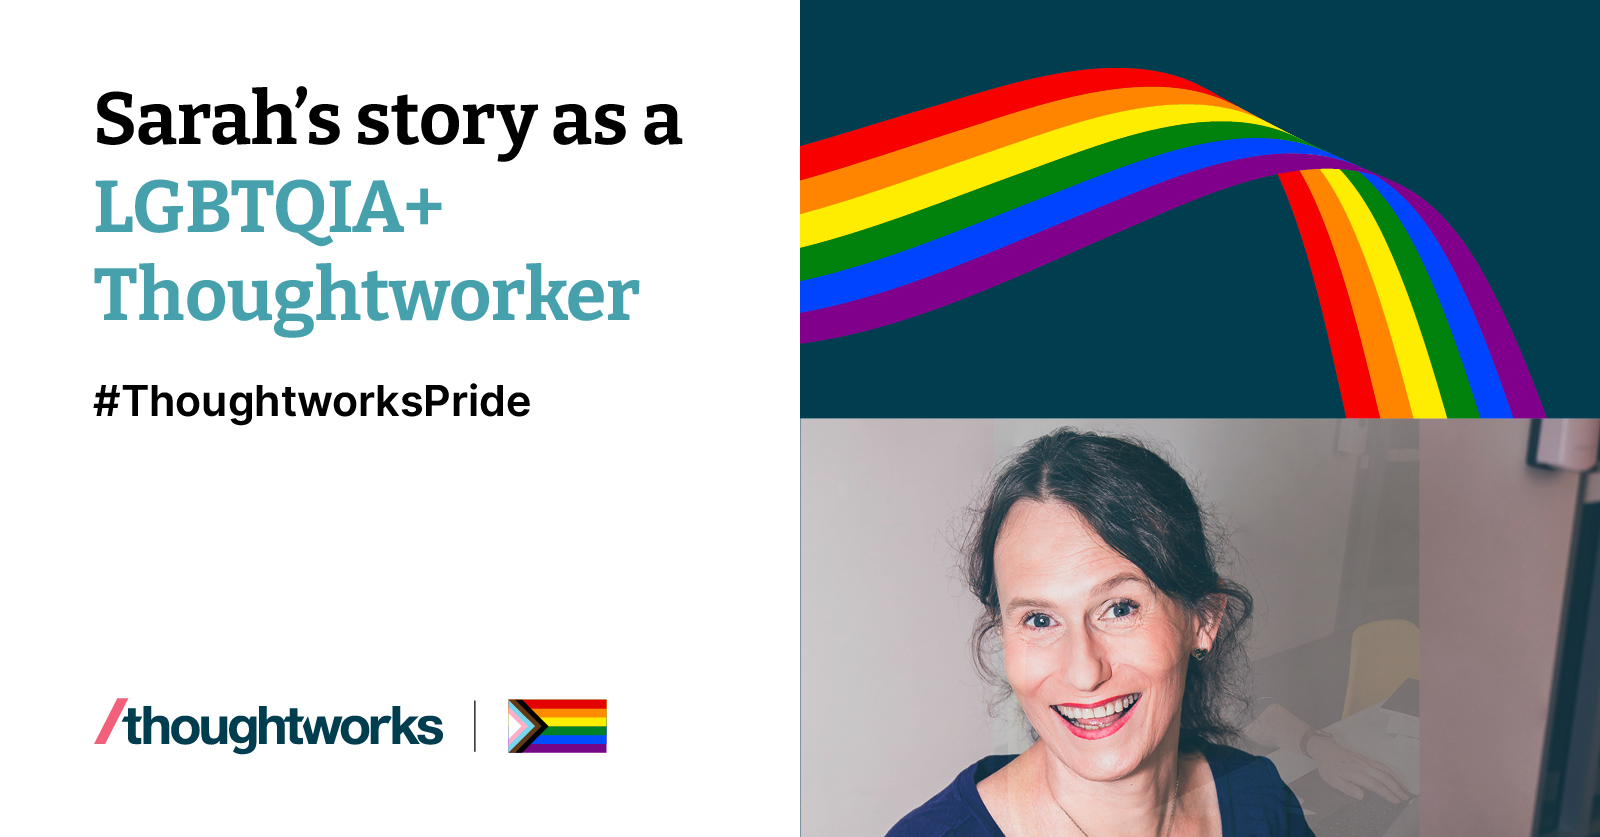 Sarah Smith story as a LGBTQIA plus Thoughtworker. Right hand side shows Sarah Smith headshot and the Pride flag